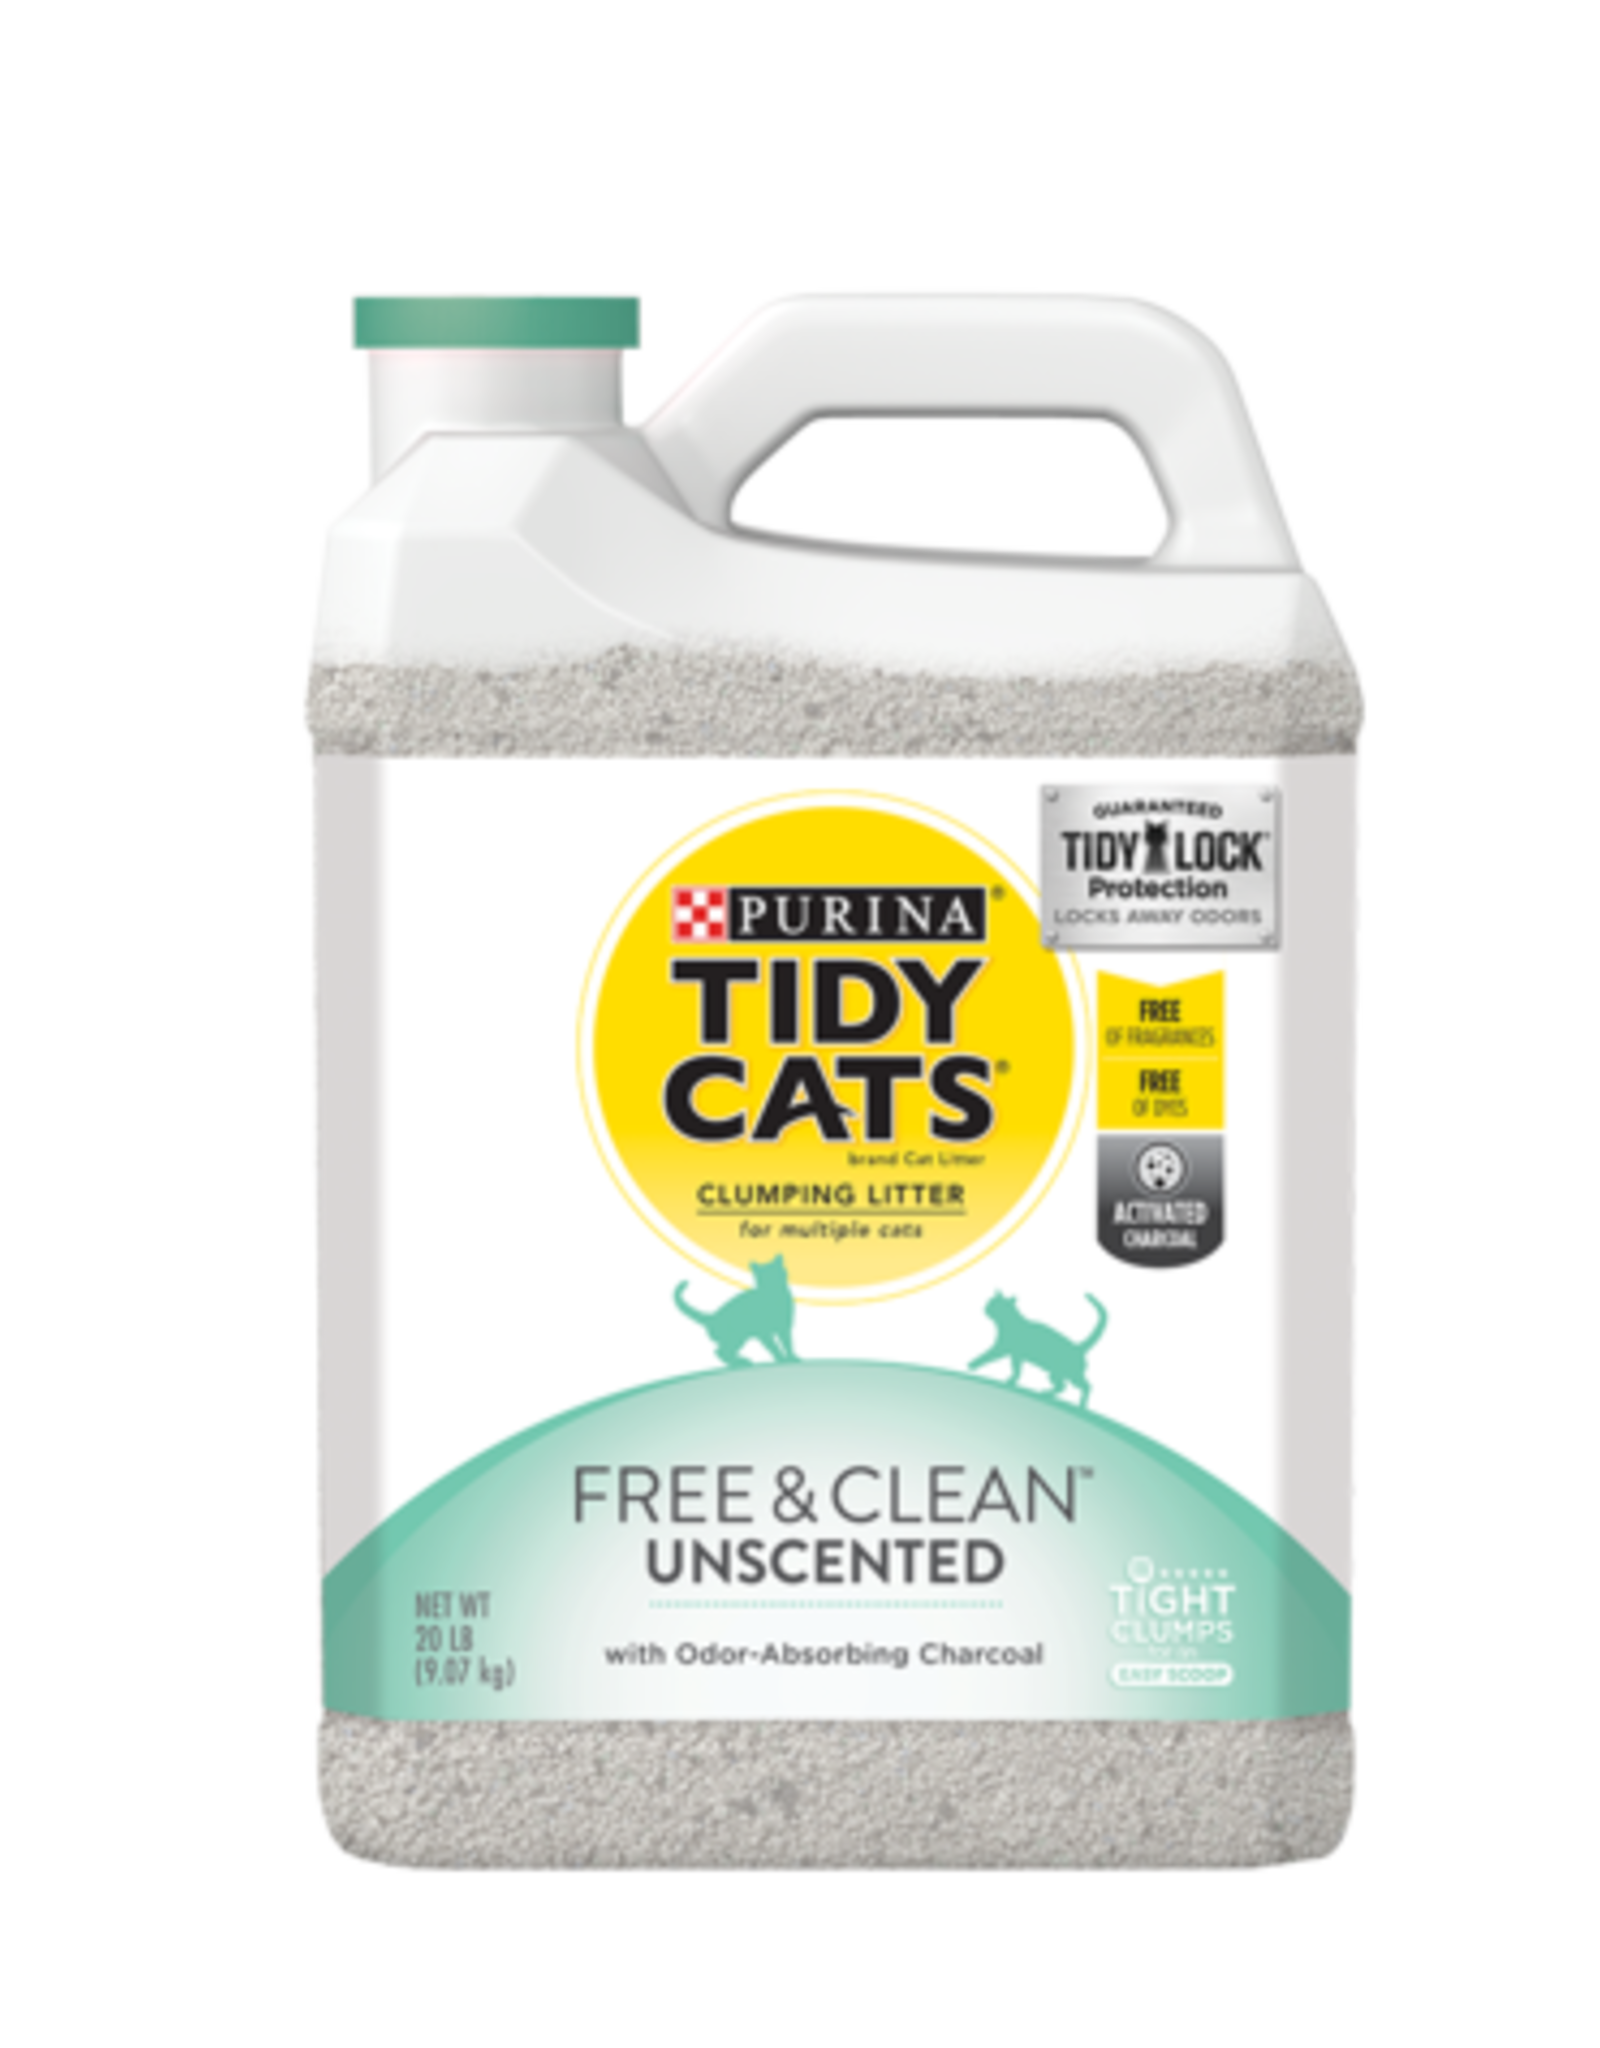 NESTLE PURINA PETCARE TIDY CATS LITTER FREE & CLEAN UNSCENTED JUG 20LBS